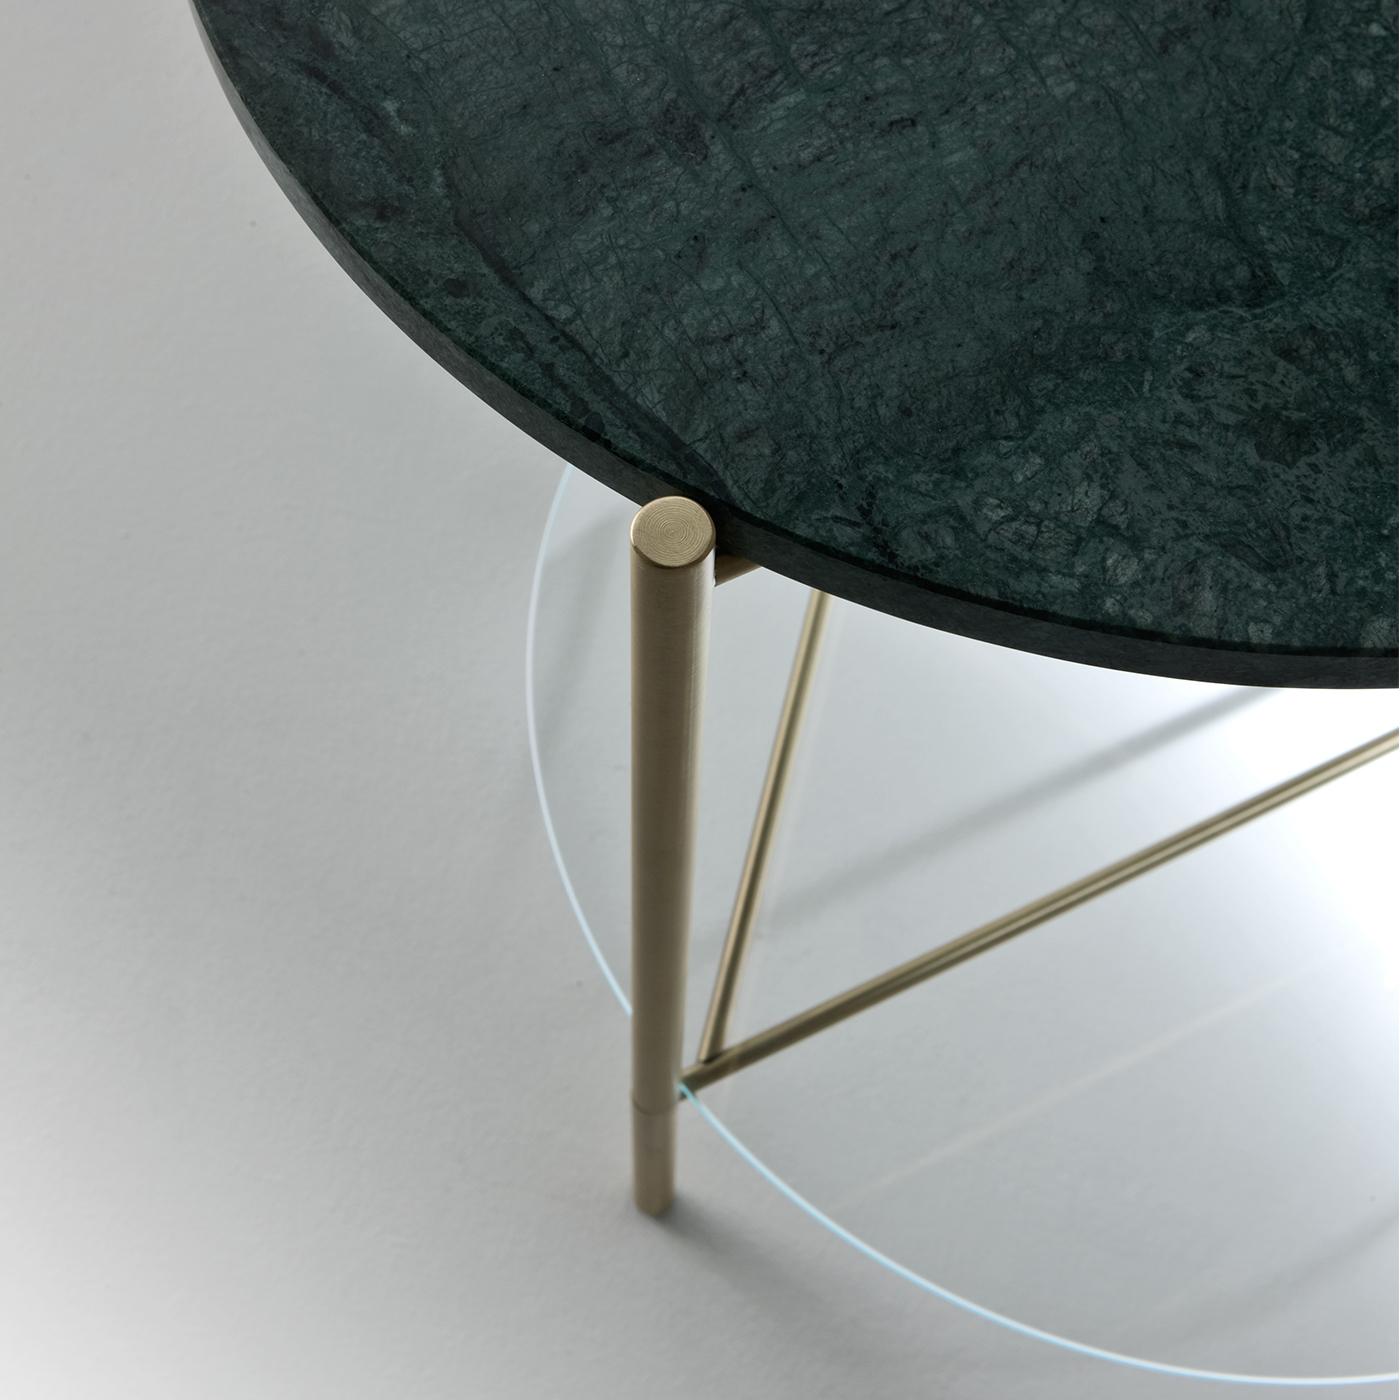 This simple and stylish Echo Side Table is crafted in satin brass with the lower shelf in extralight glass and table top in matt polished Guatamala green marble. Echo tables are available with one of two shelves in different marble varieties,